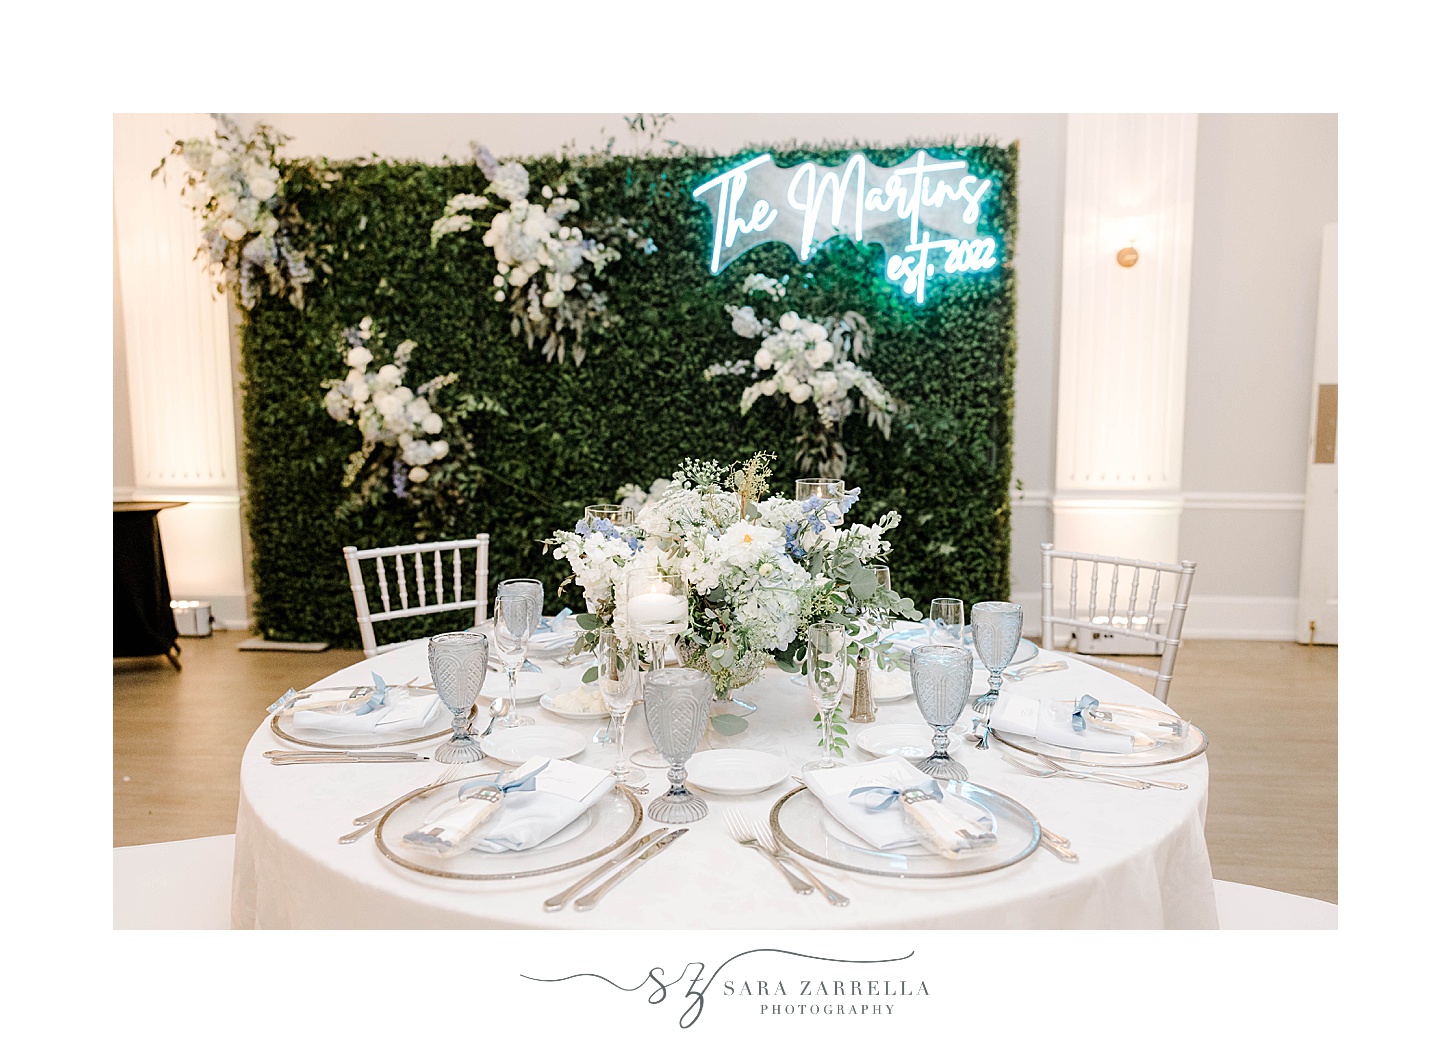 sweetheart table in front of greenery wall with neon sign